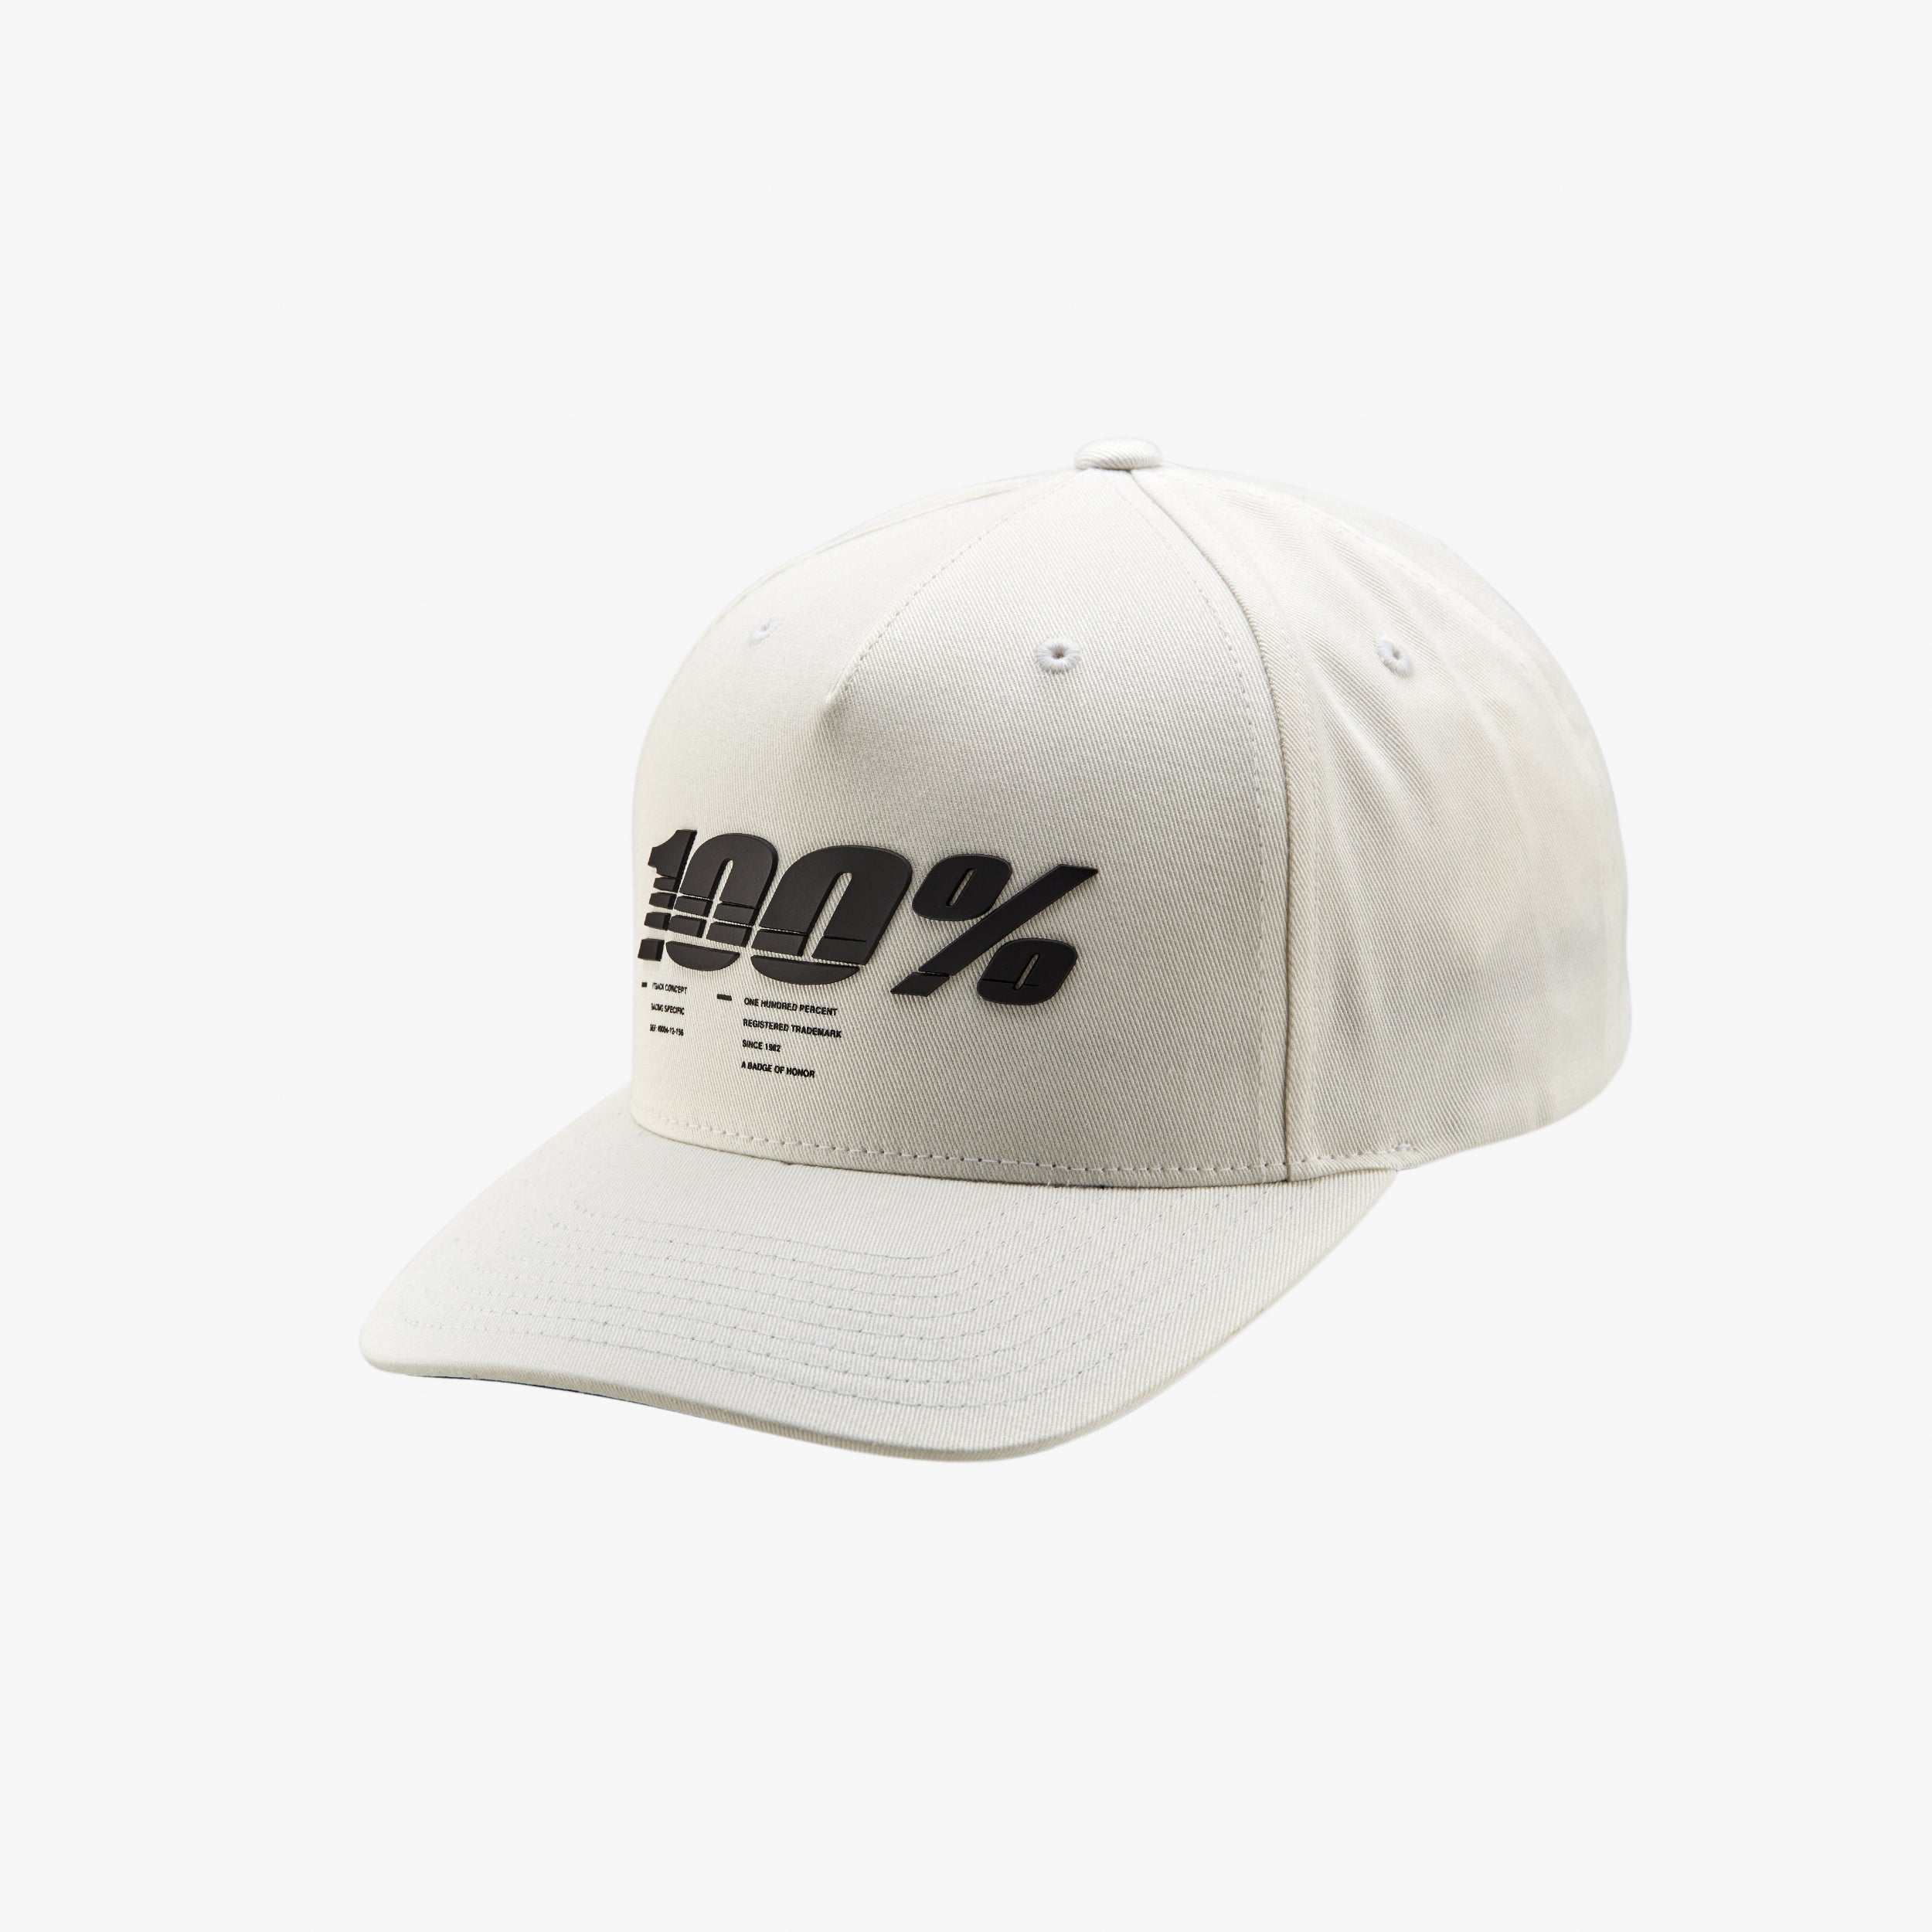 STAUNCH Snapback Cap X-Fit White